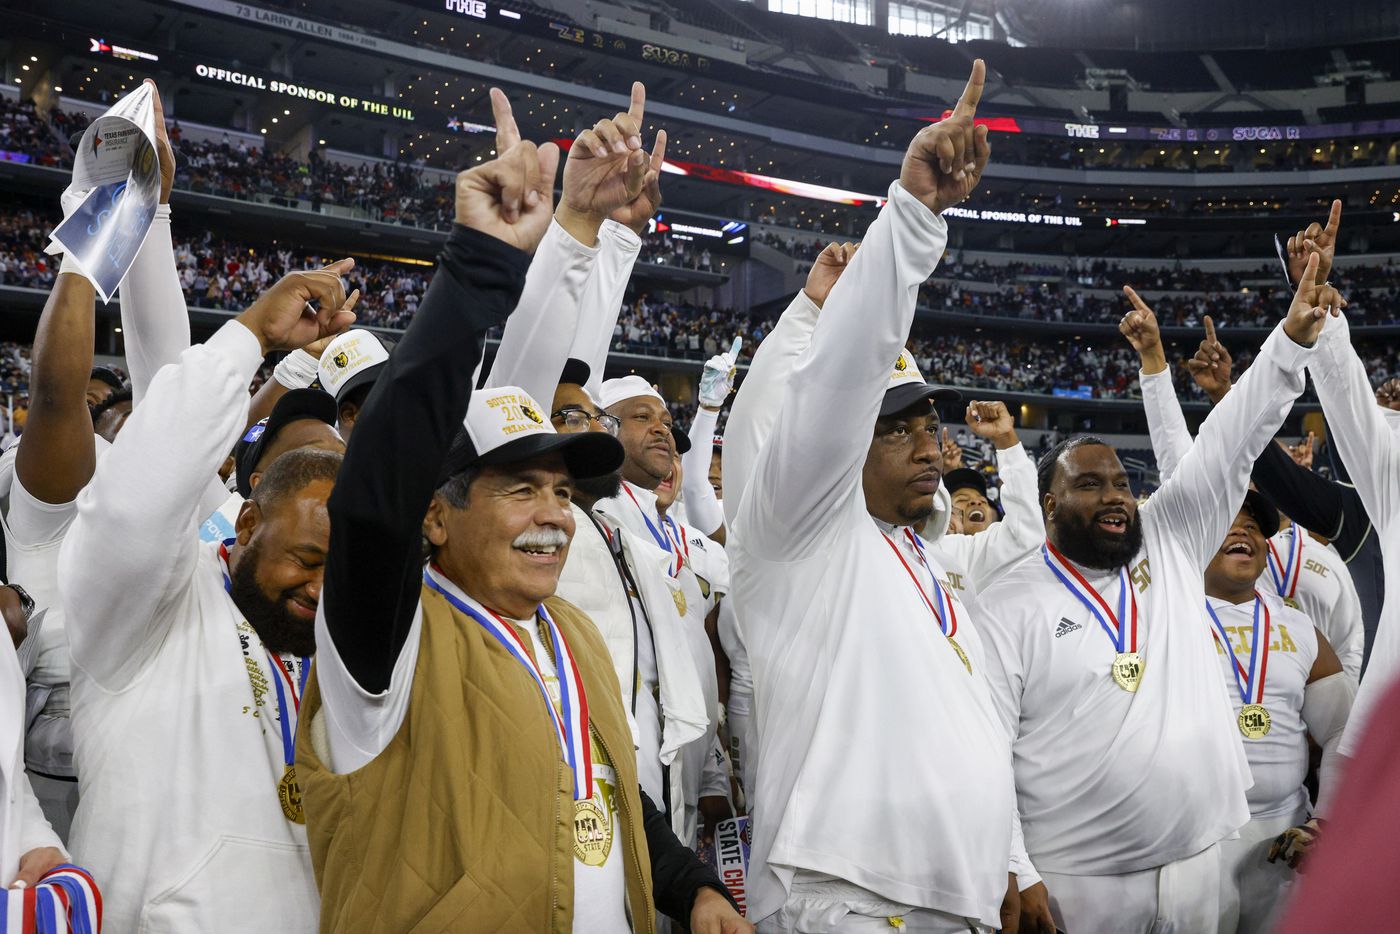 Dallas ISD Superintendent Michael Hinojosa (left) and South Oak Cliff head coach Jason Todd (center) celebrate with the team after winning the Class 5A Division II state championship game at AT&T Stadium in Arlington, Saturday, Dec. 18, 2021. South Oak Cliff defeated Liberty Hill 23-14 for Dallas ISD’s first title since 1958. (Elias Valverde II/The Dallas Morning News)